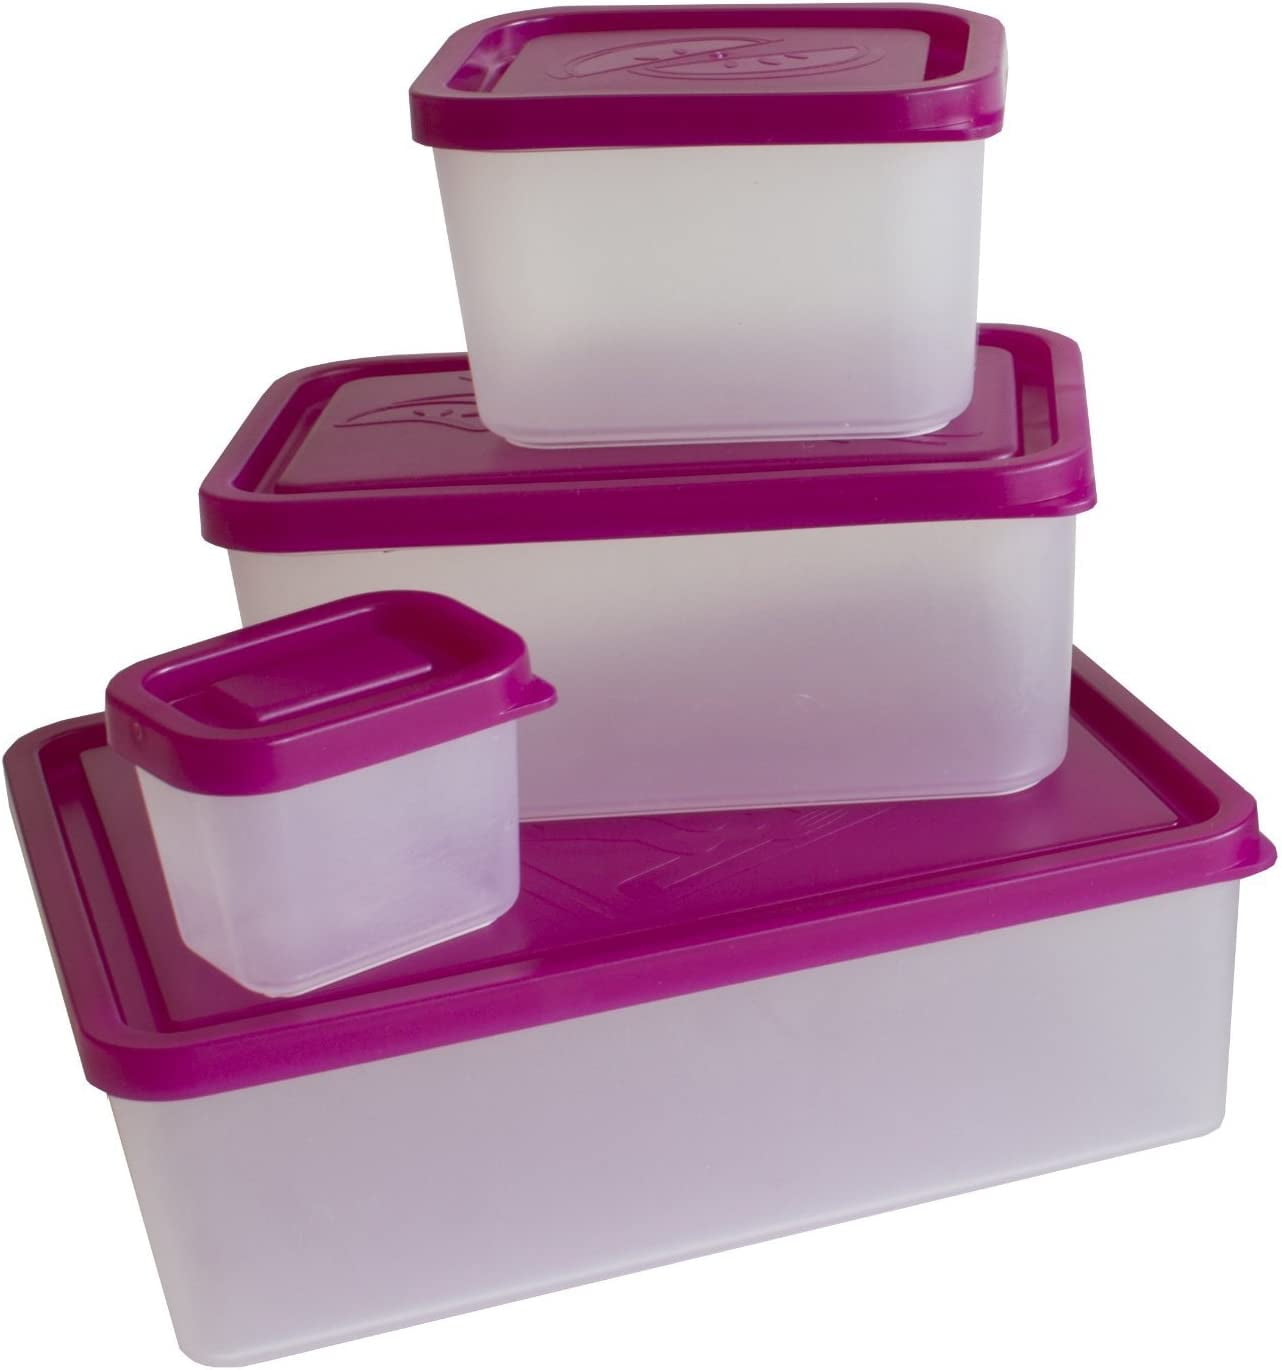 Leakproof Portion Control Lunch Containers - Reusable Meal Prep Containers, No BPA - Set of 4 (Sorbet)